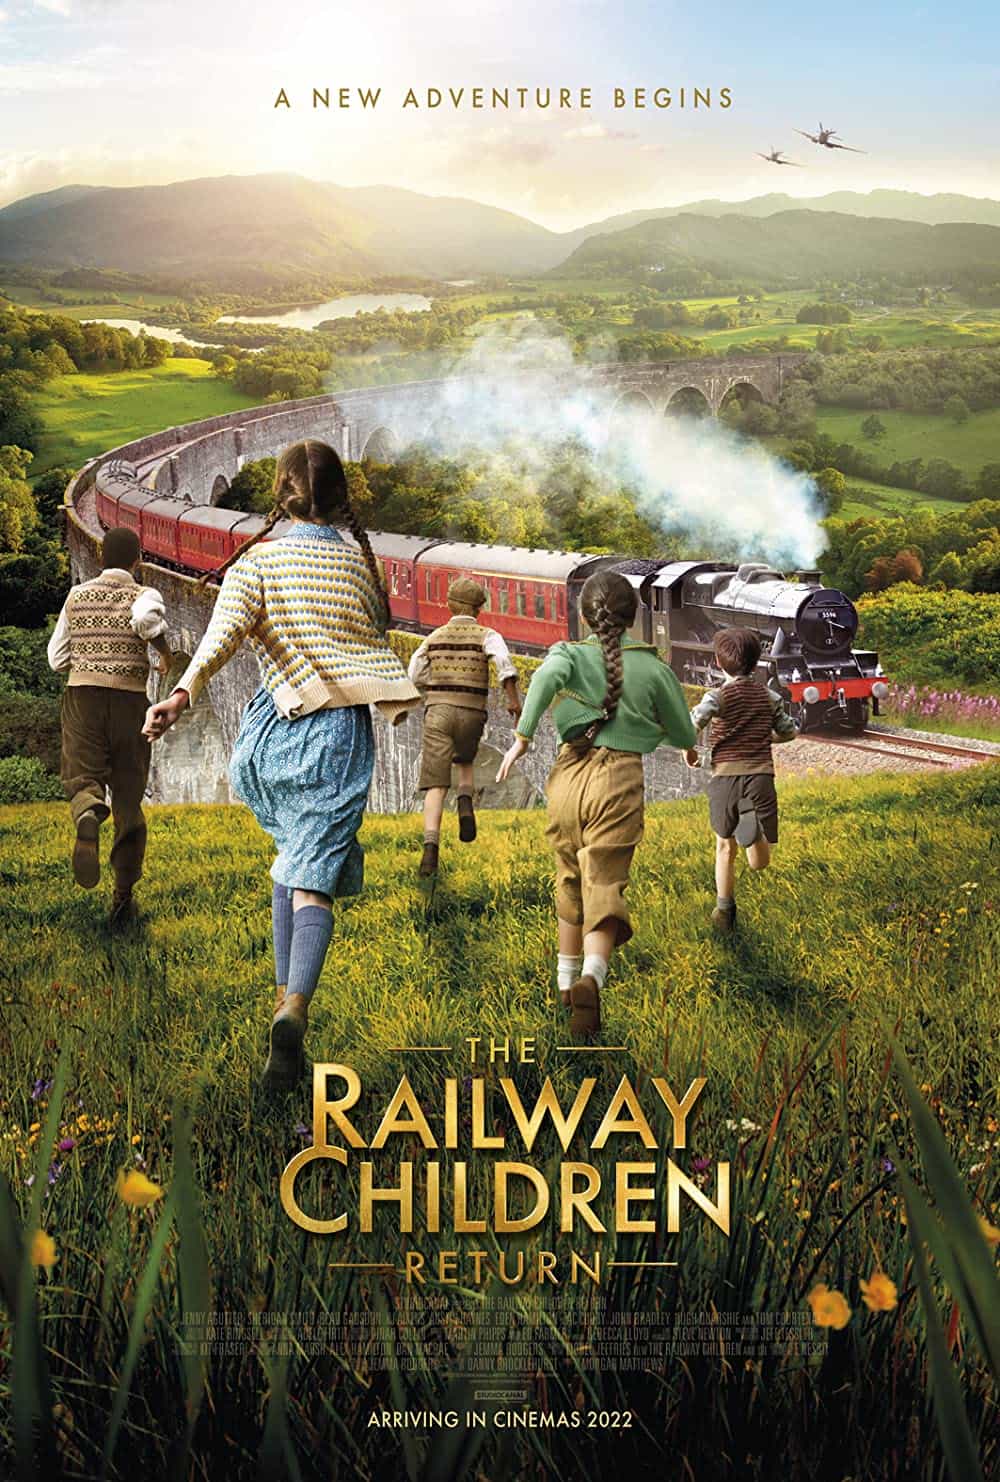 The Railway Children Return has been given a PG age rating in the UK for violence, racism theme, threat, language, rude humour, dangerous behaviour